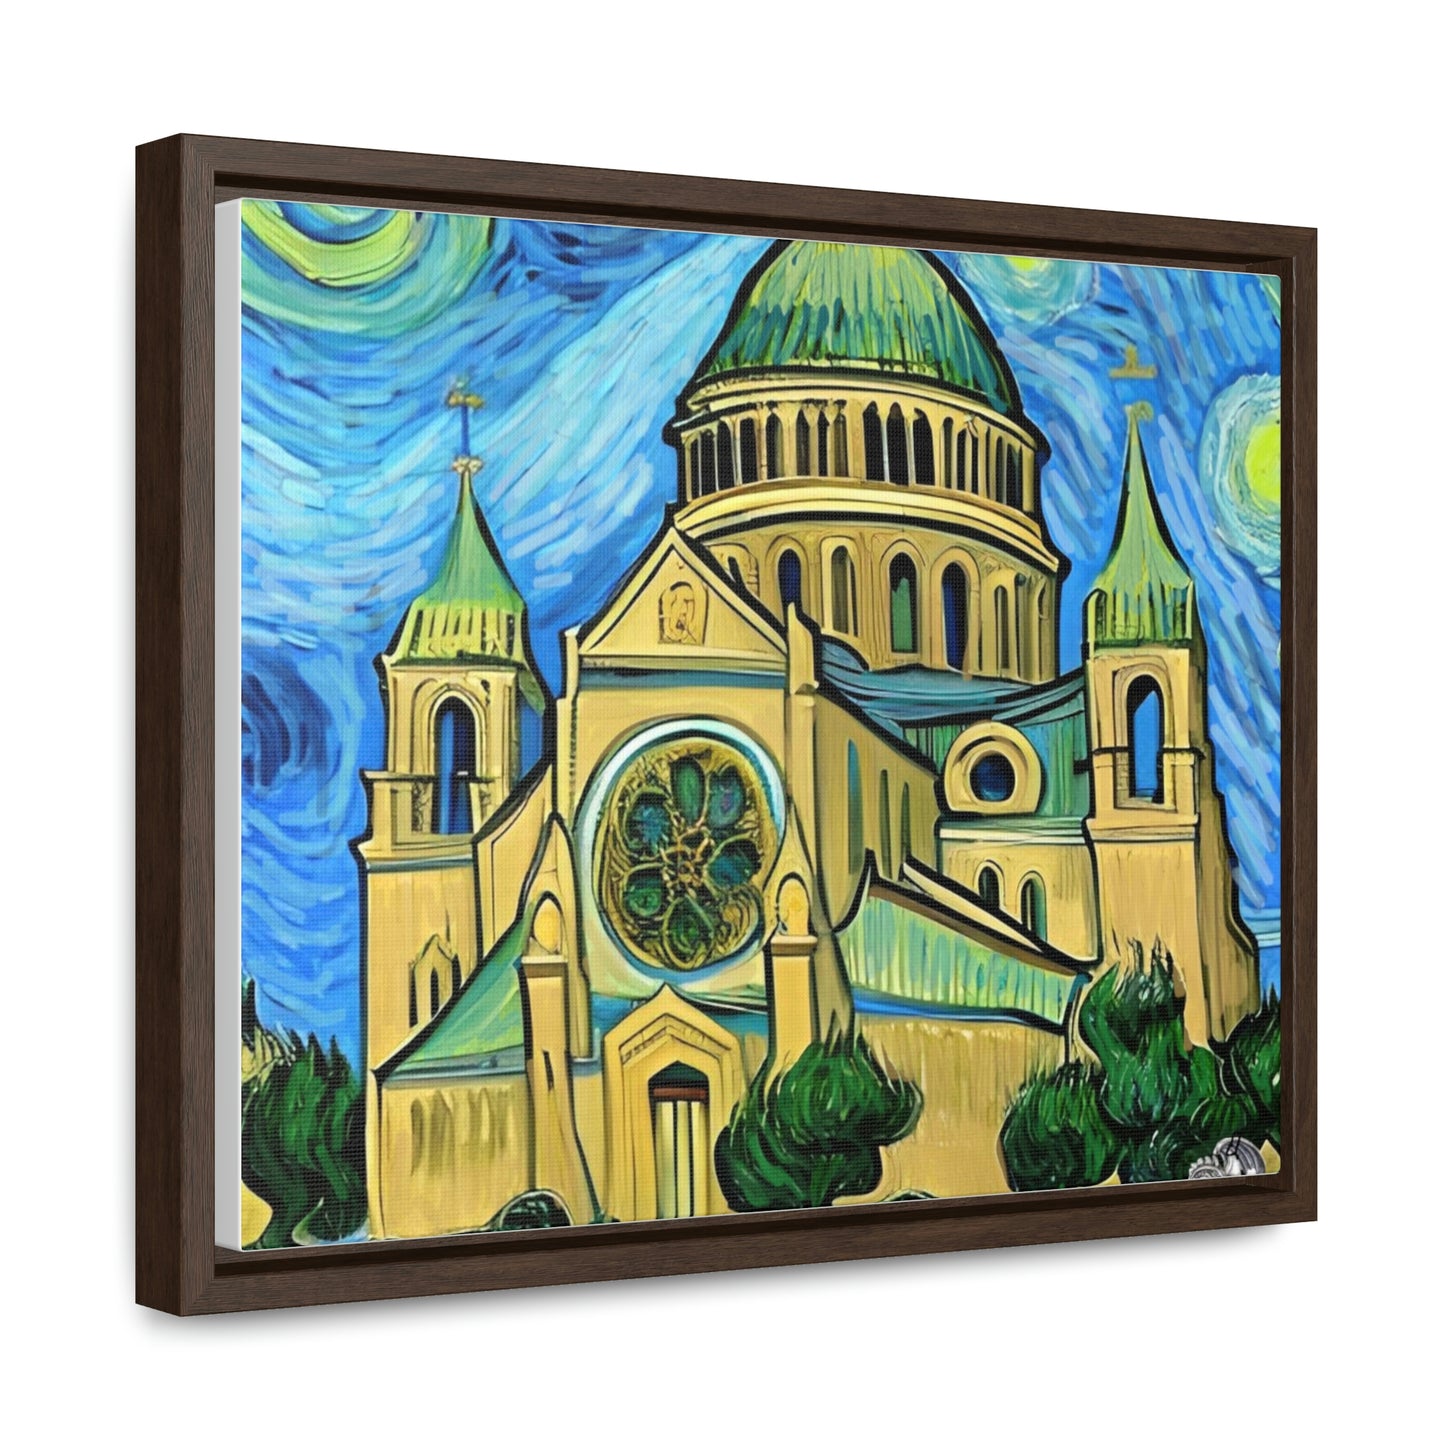 Vincent in Minnesota, Saint Paul Cathedral